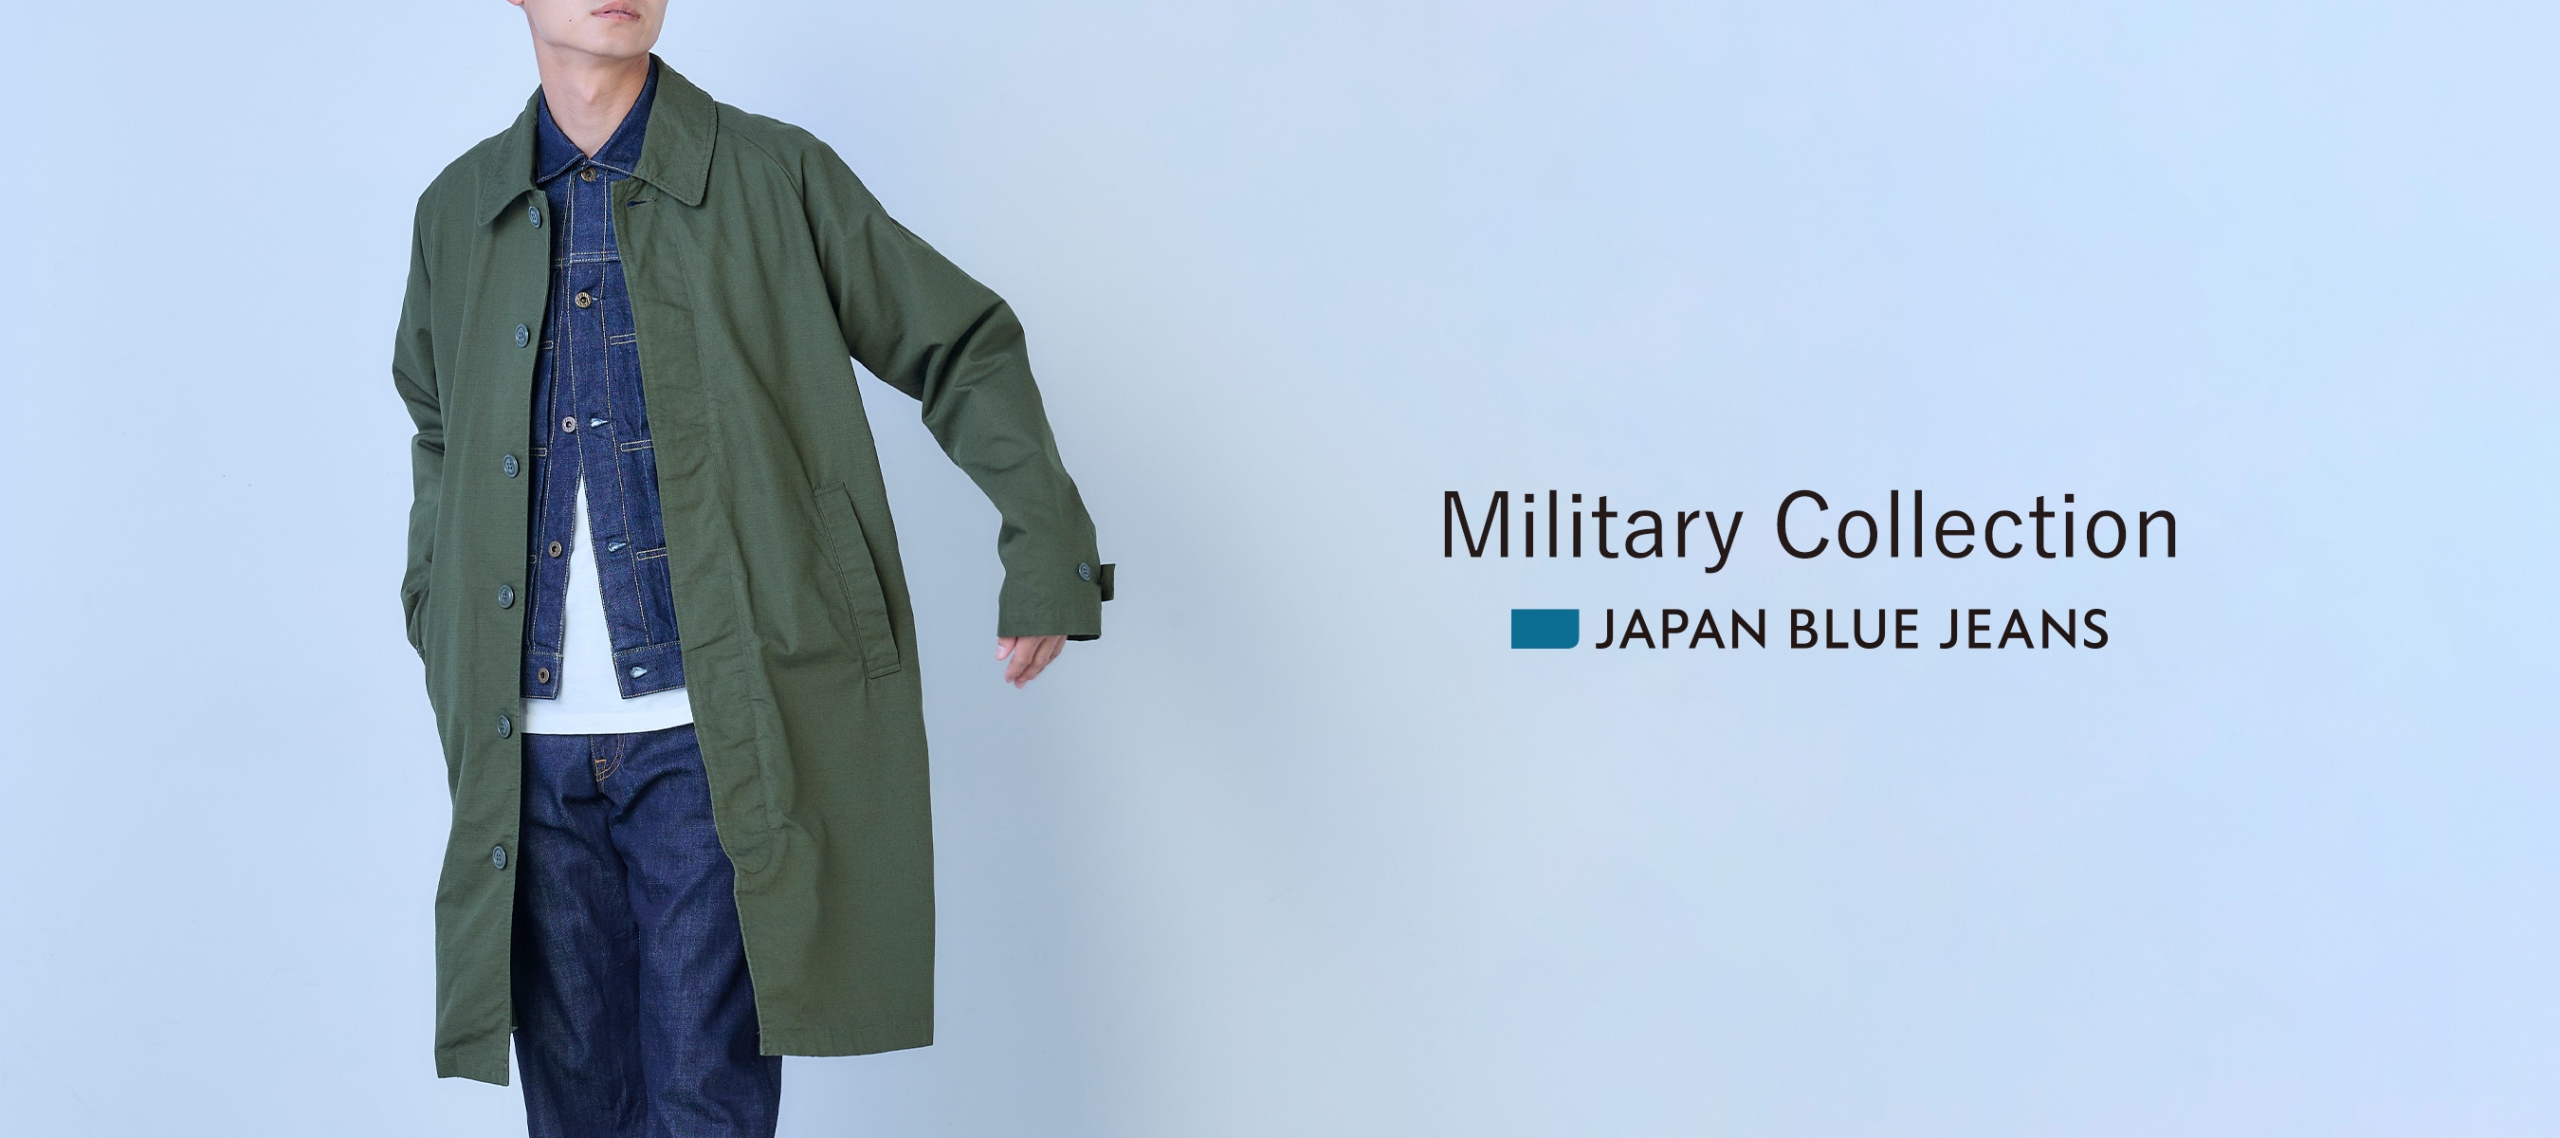 JAPAN BLUE JEANS MilitaryCollection PC版